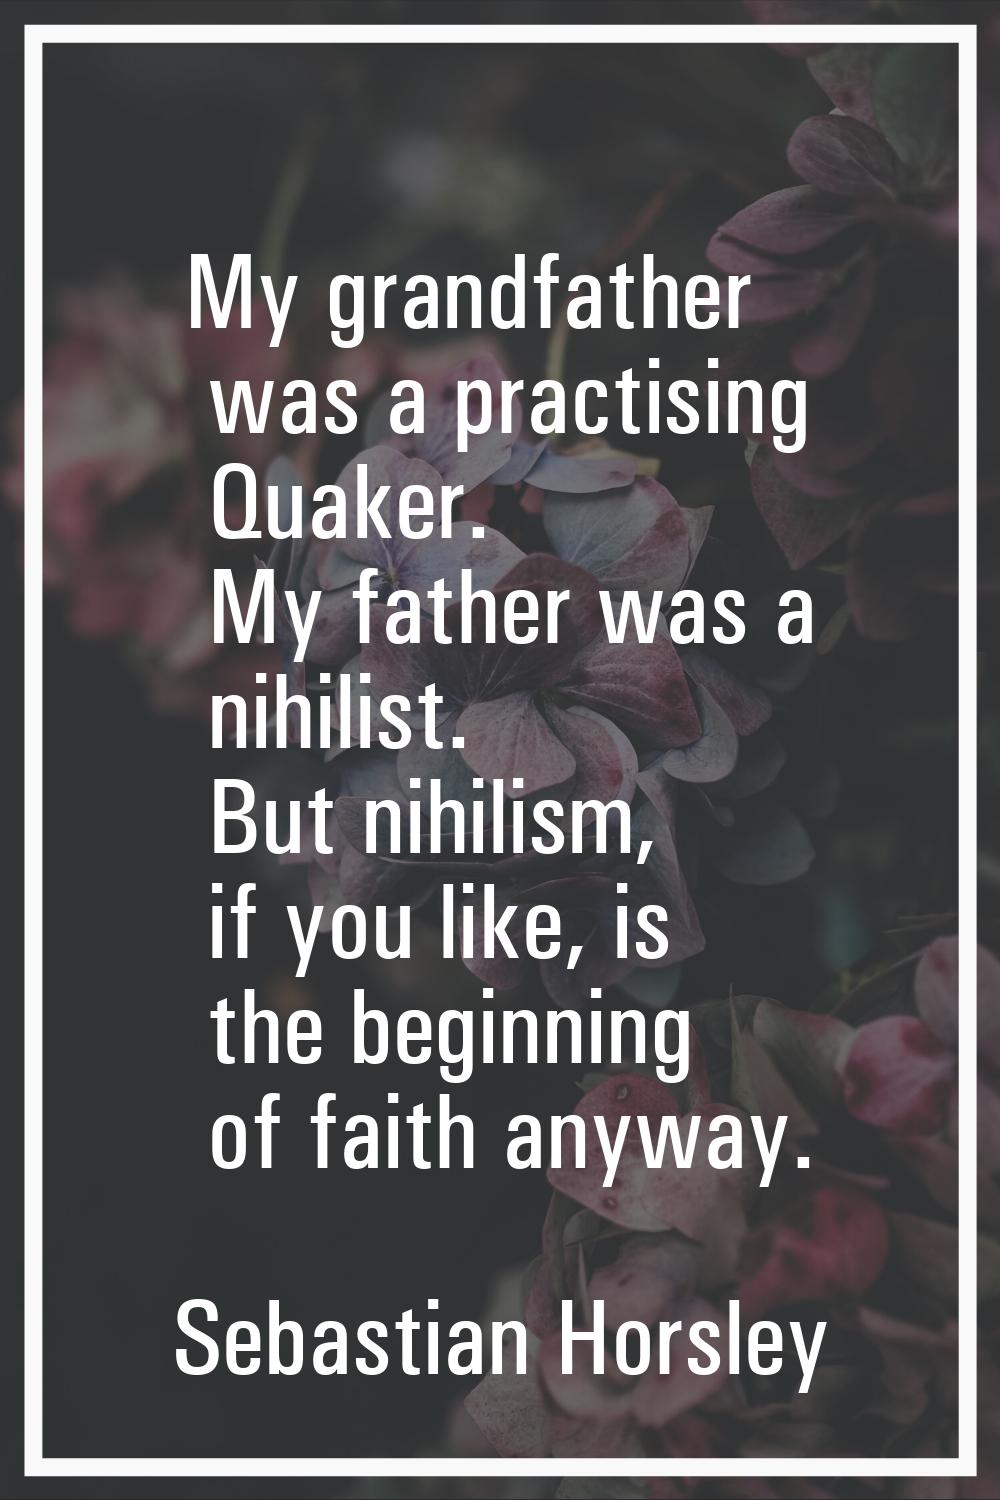 My grandfather was a practising Quaker. My father was a nihilist. But nihilism, if you like, is the